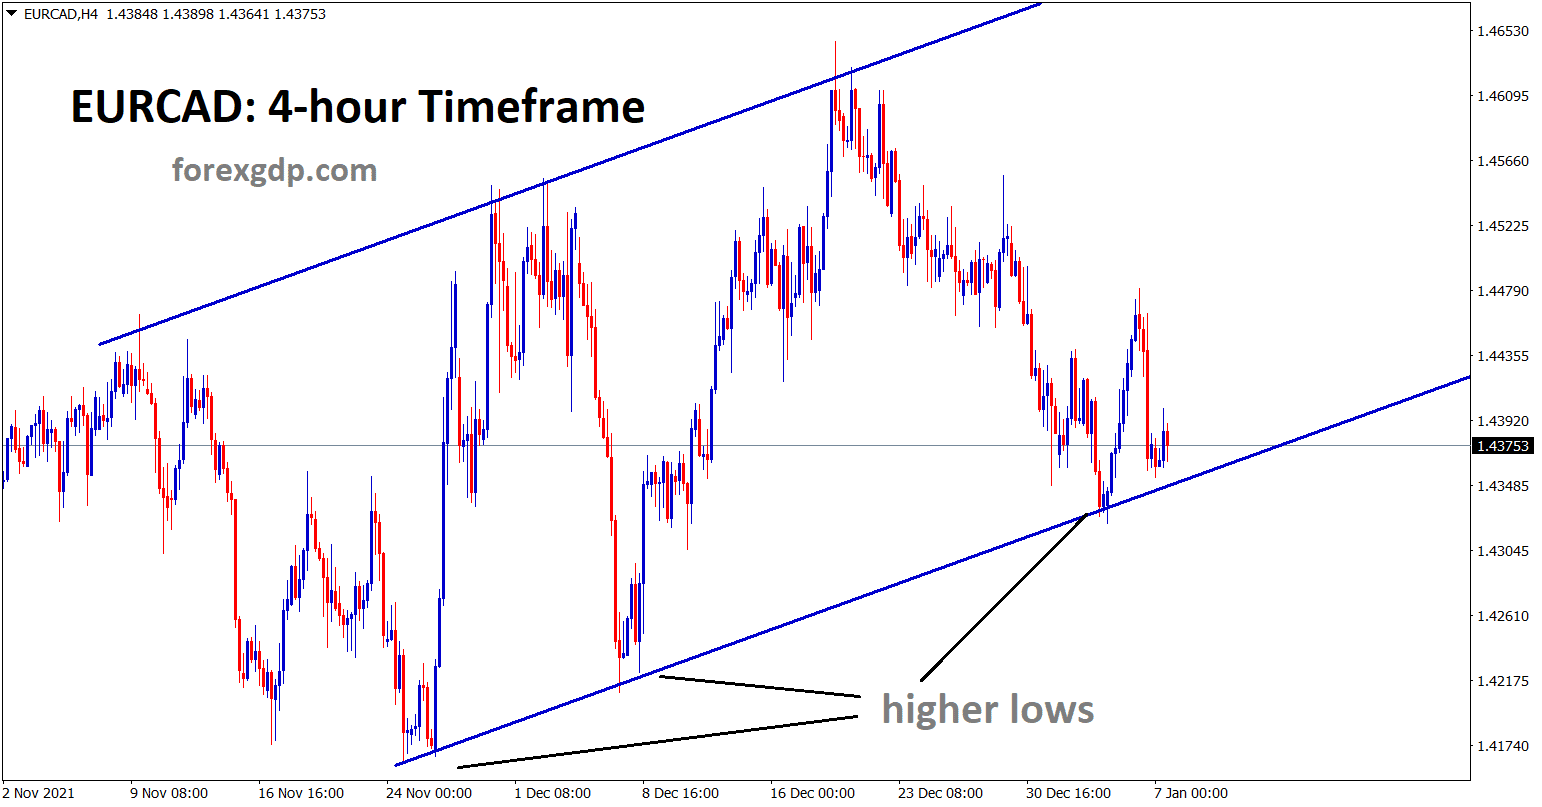 EURCAD is moving in an Ascending channel strongly